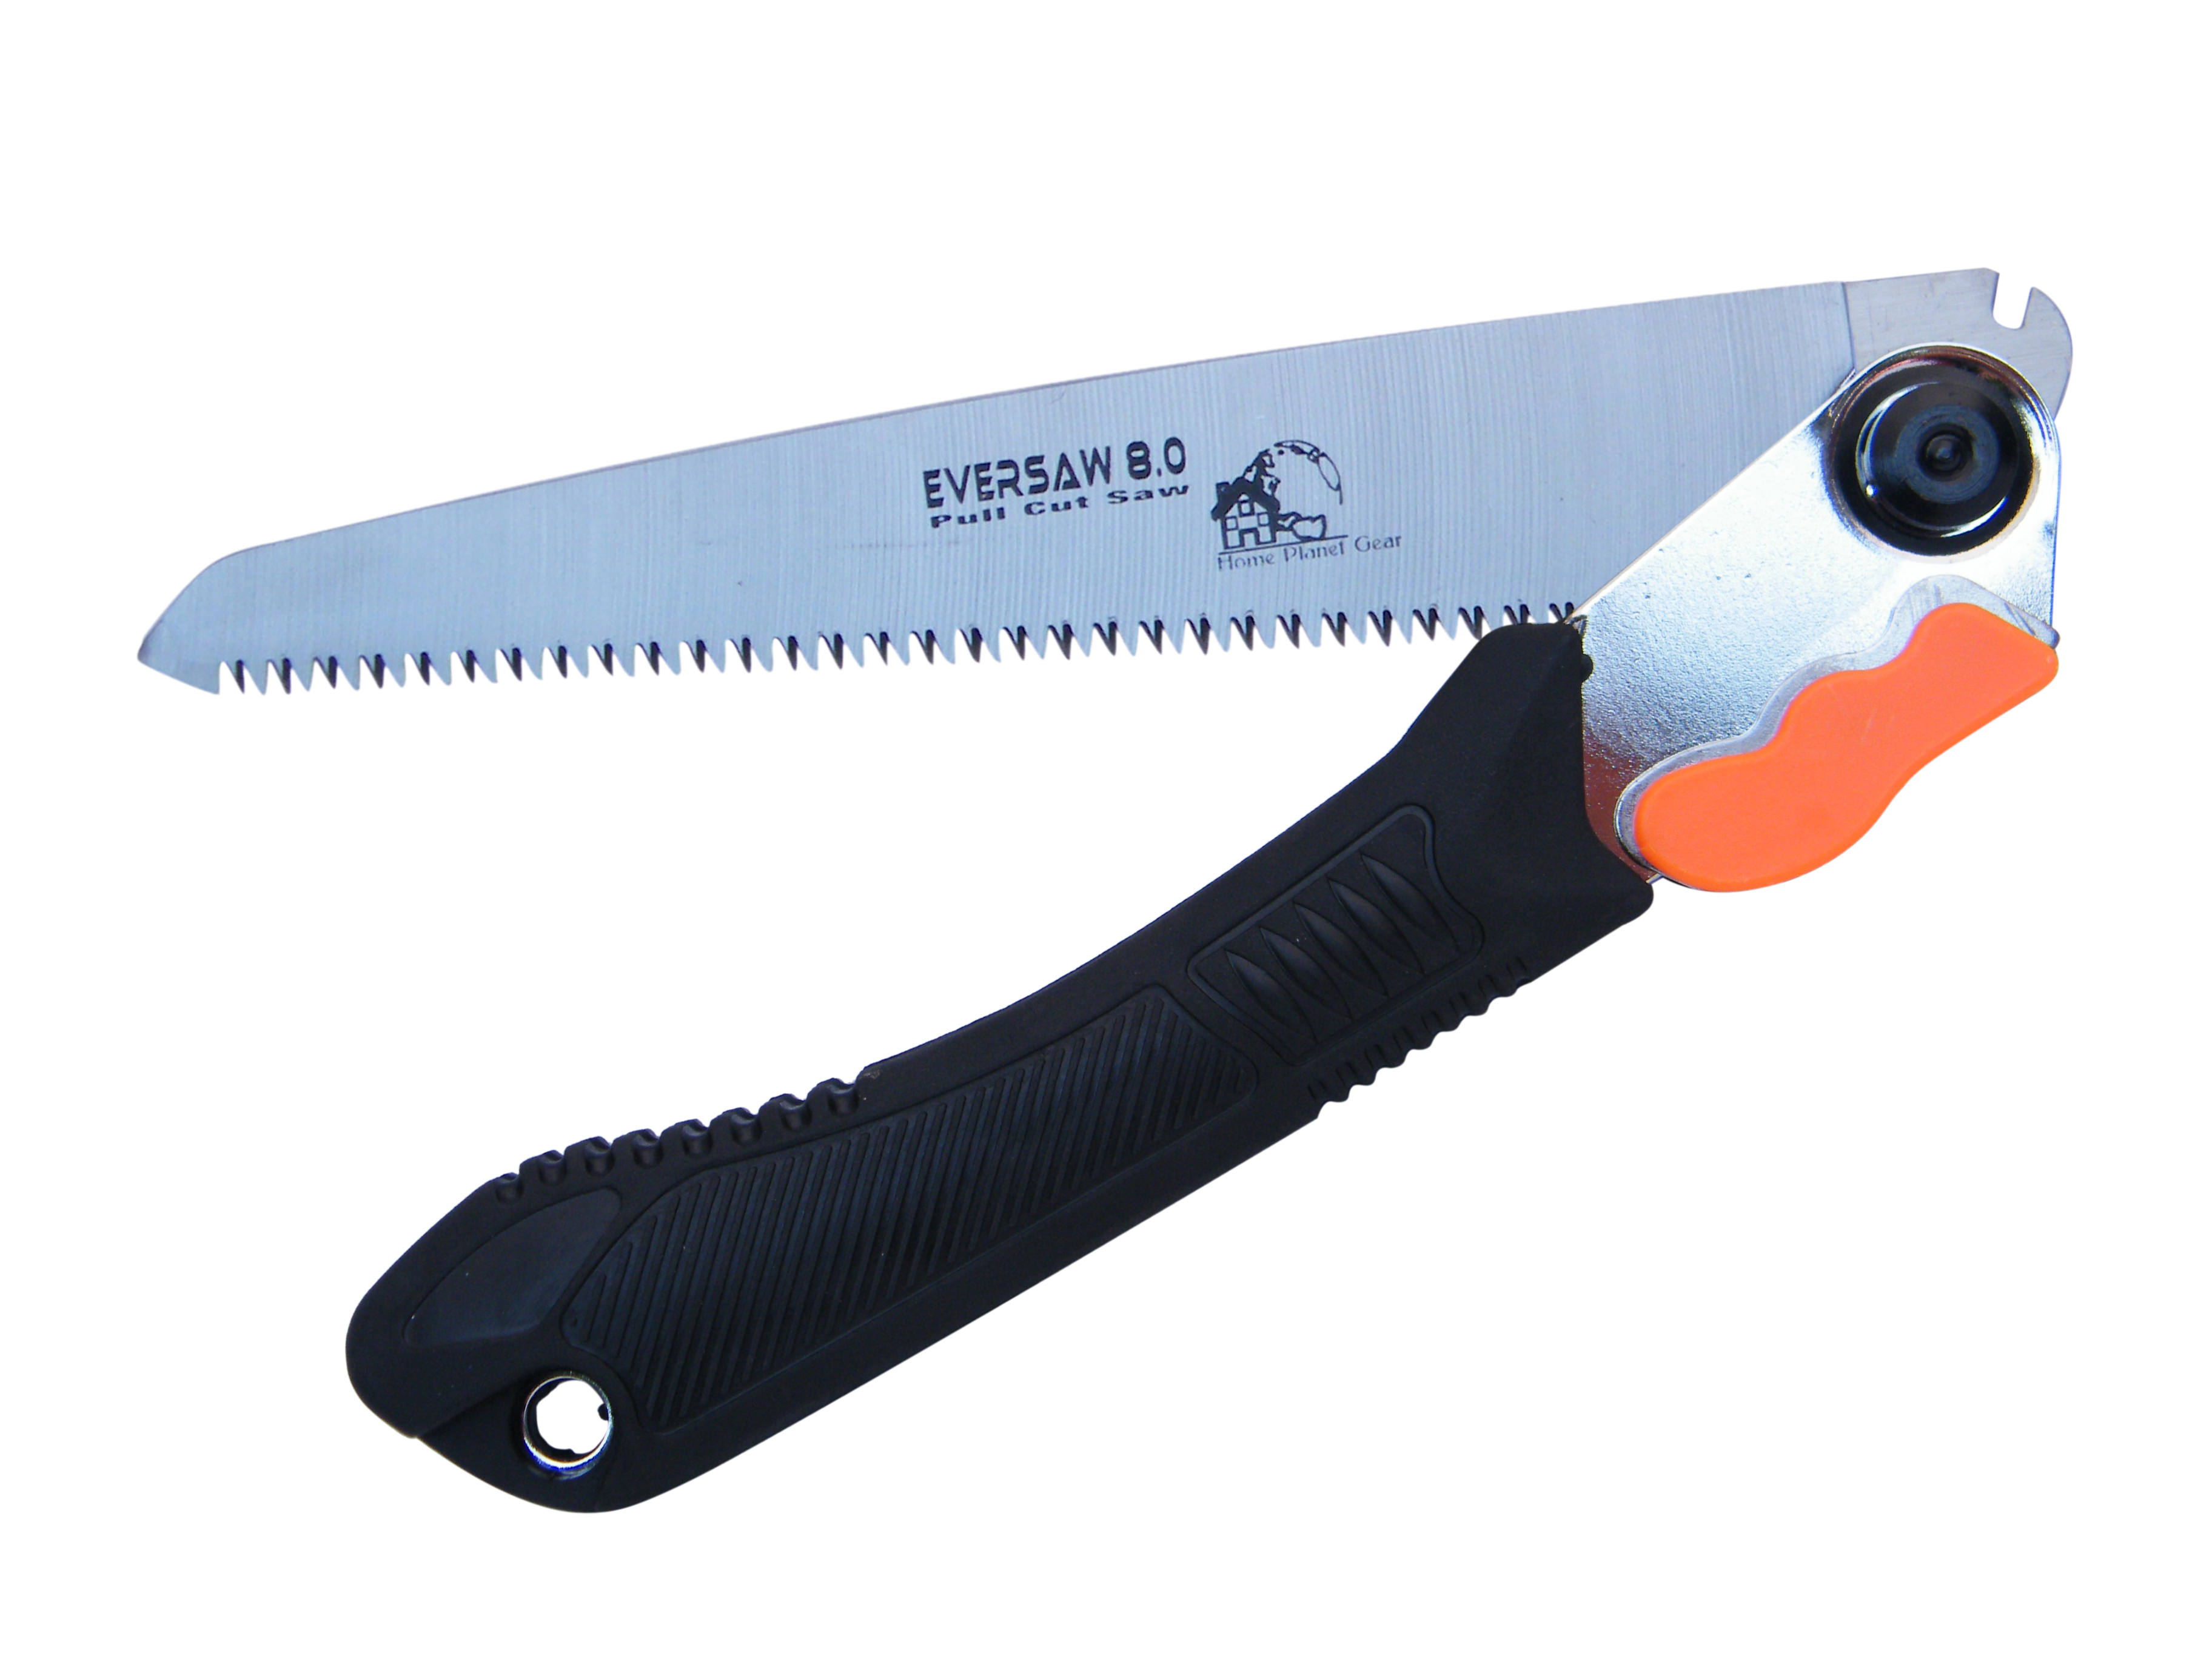 The EverSaw 8.0 folding hand saw great for tree pruning, camping, hunting, survival